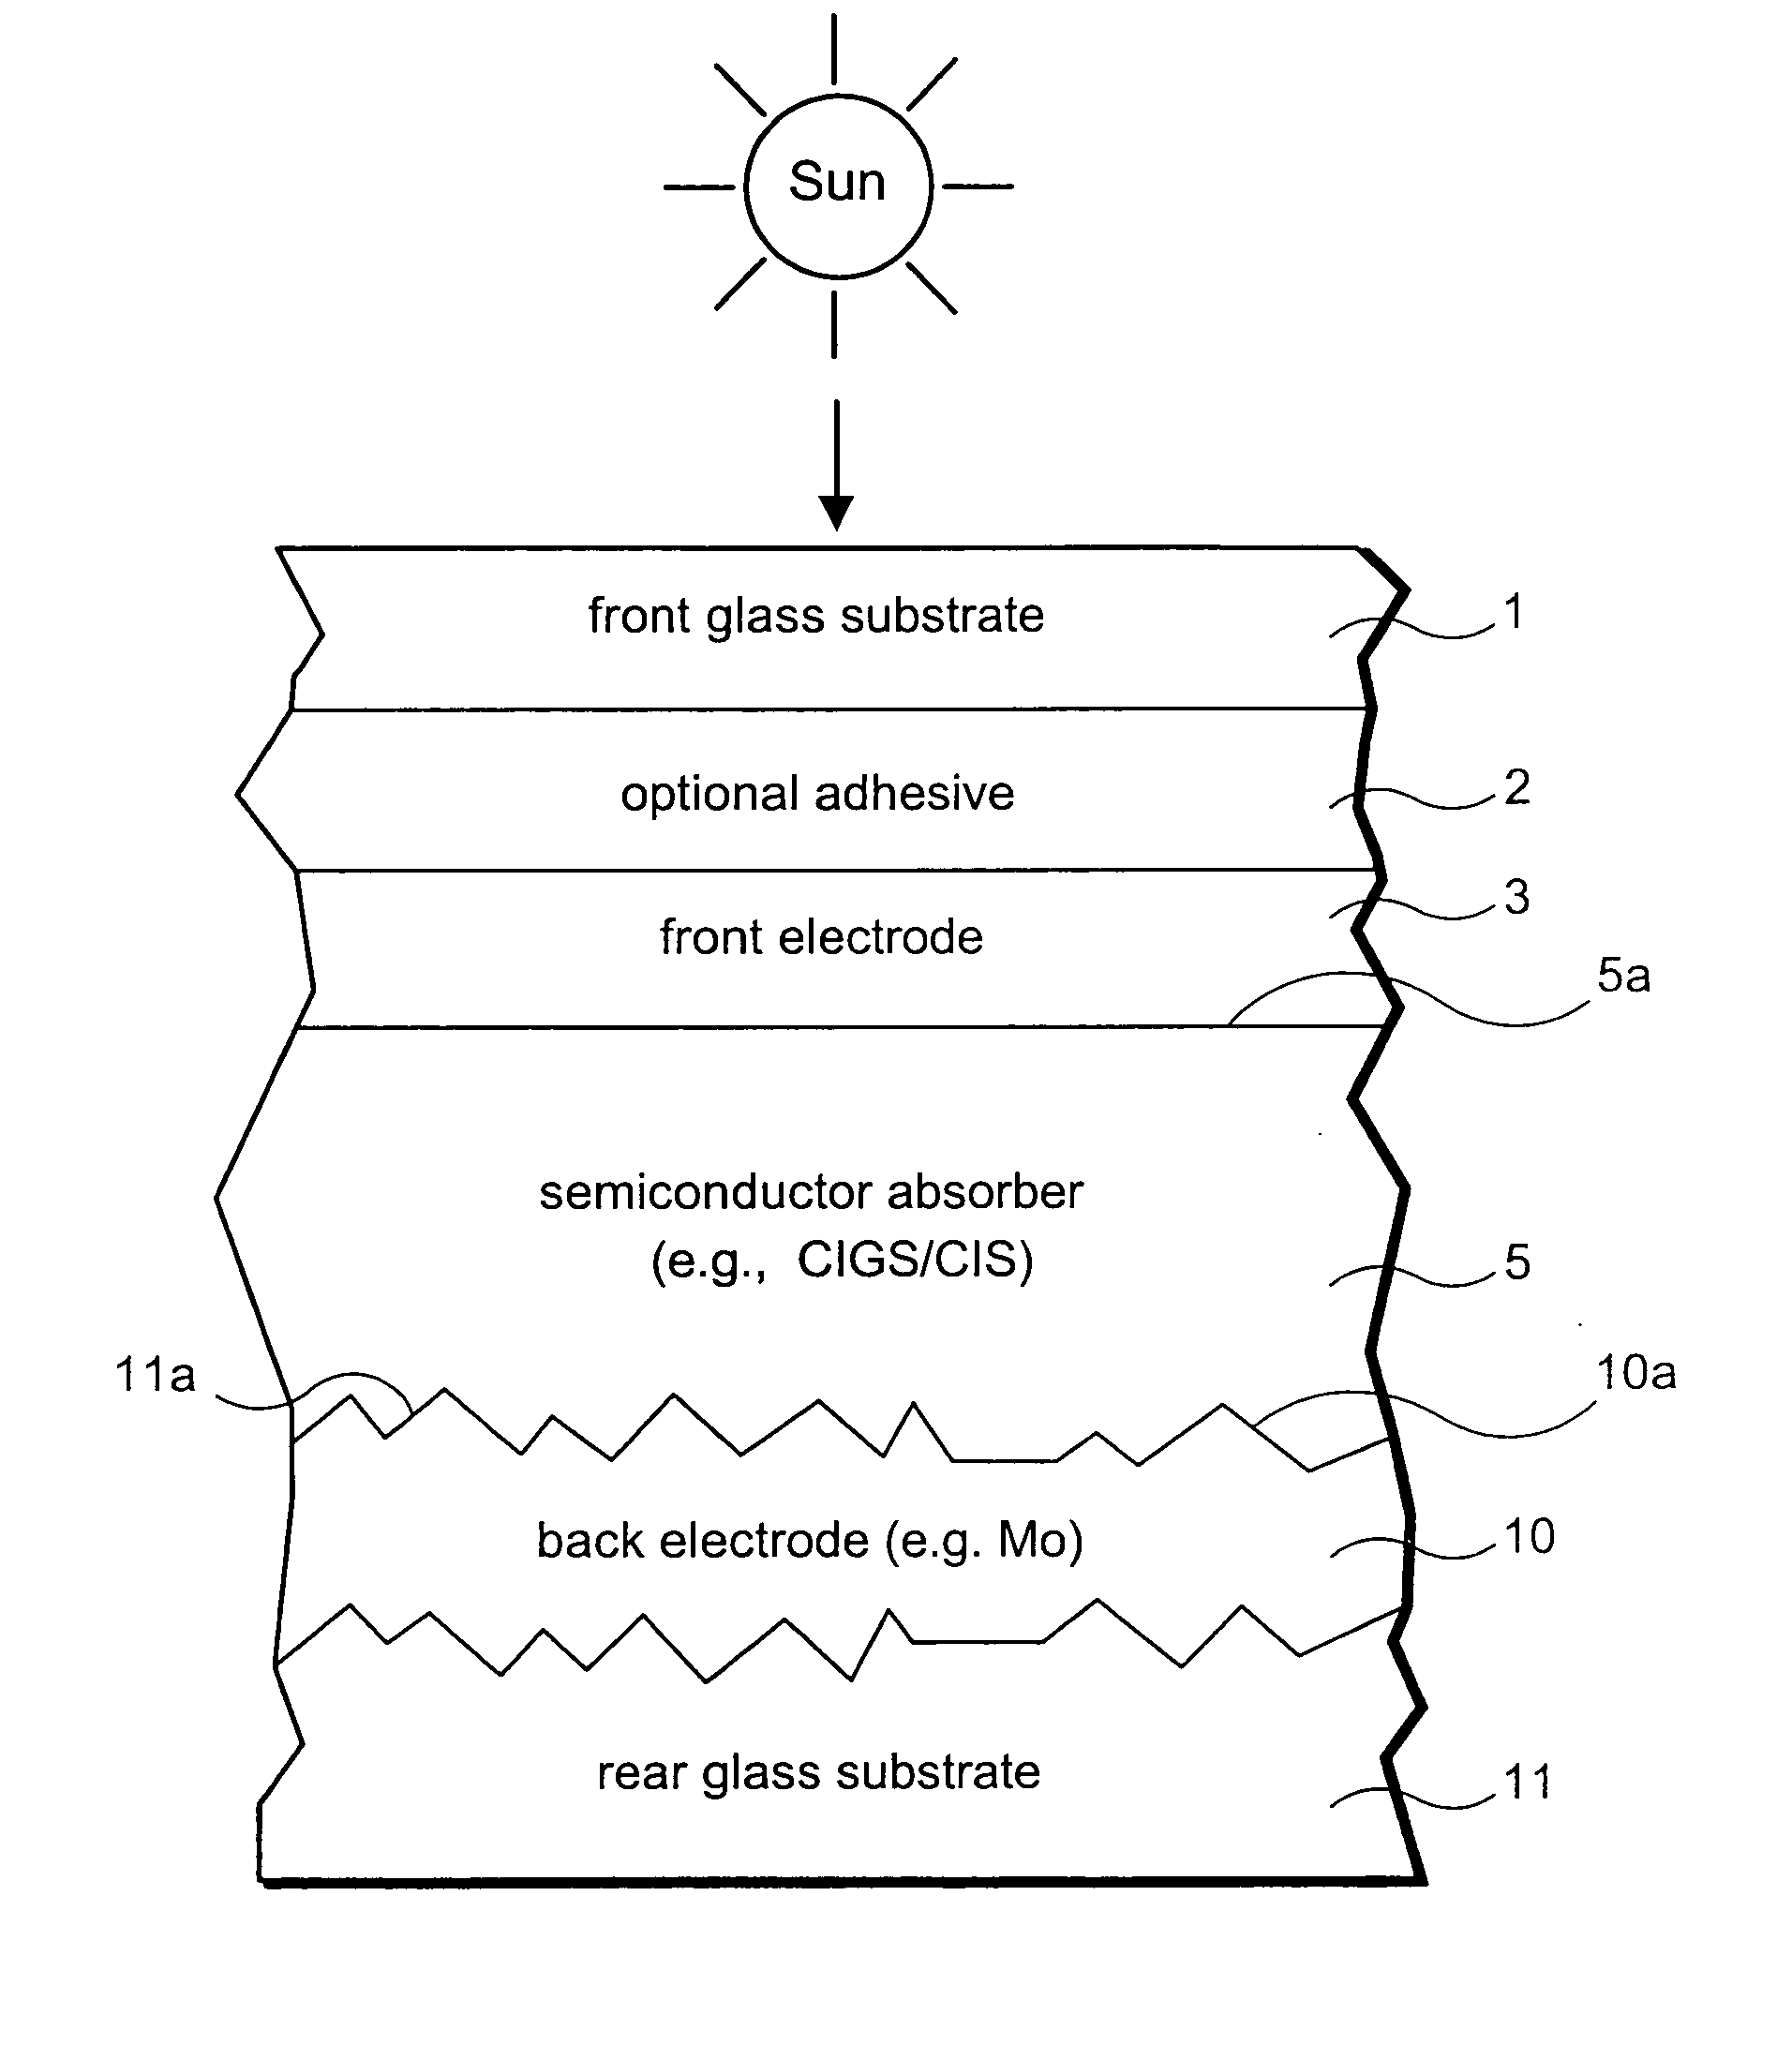 Rear electrode structure for use in photovoltaic device such as CIGS/CIS photovoltaic device and method of making same